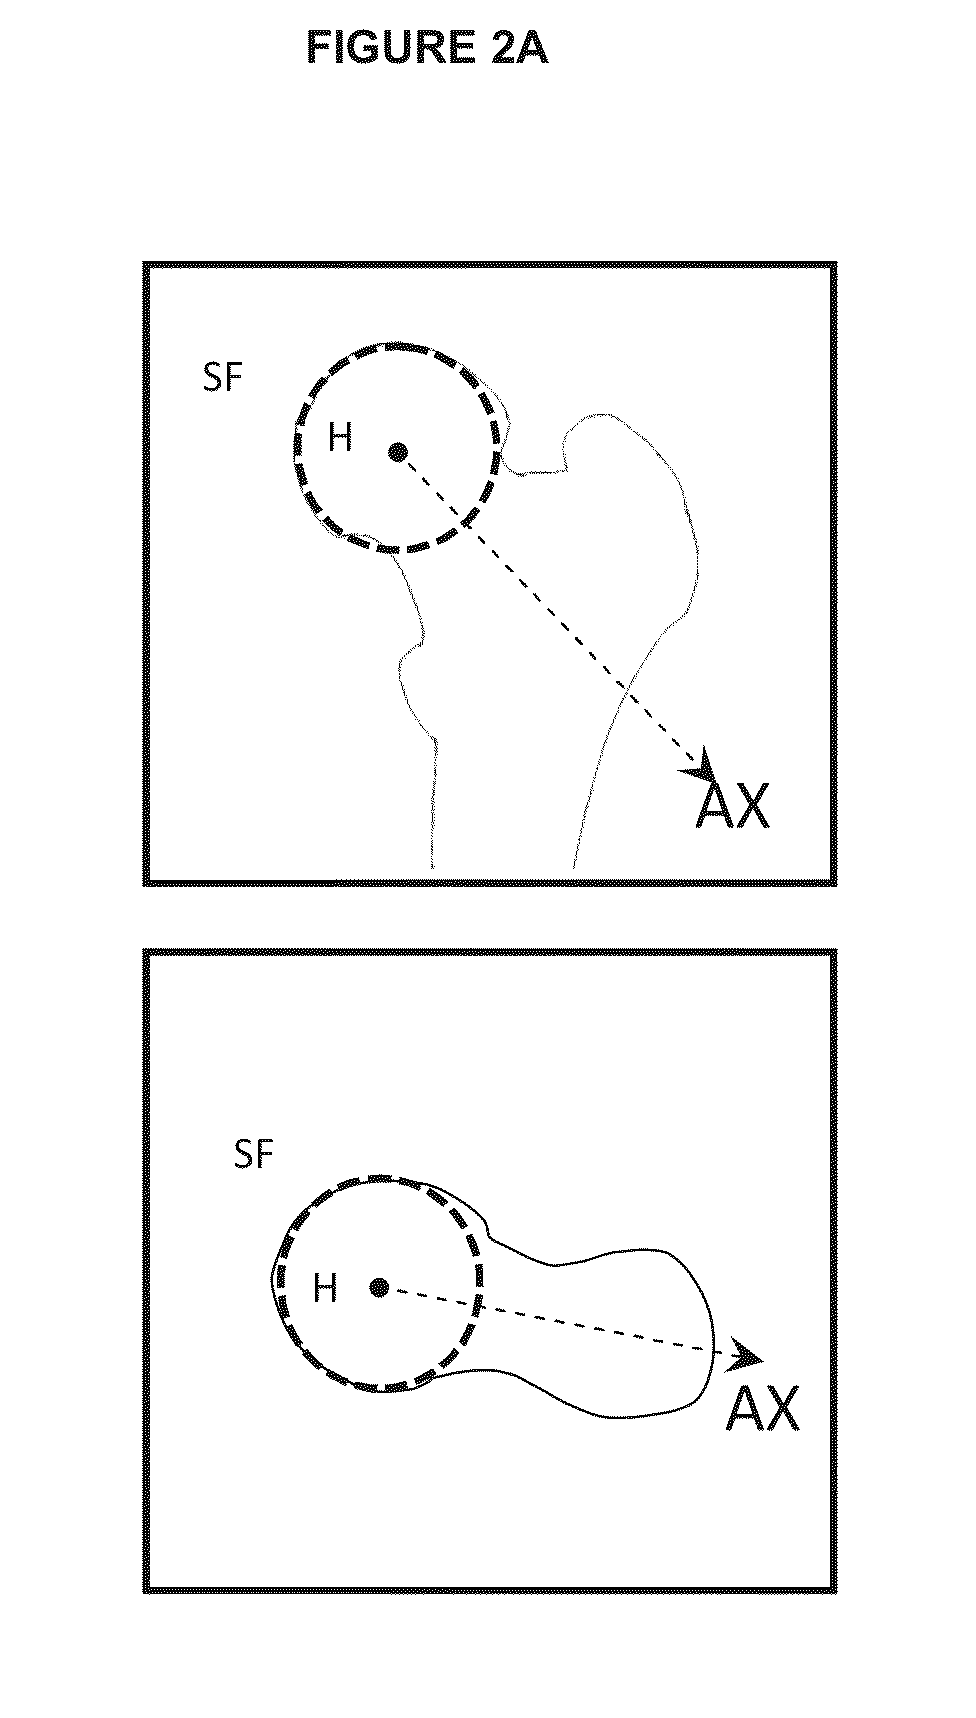 Method for determining bone resection on a deformed bone surface from few parameters